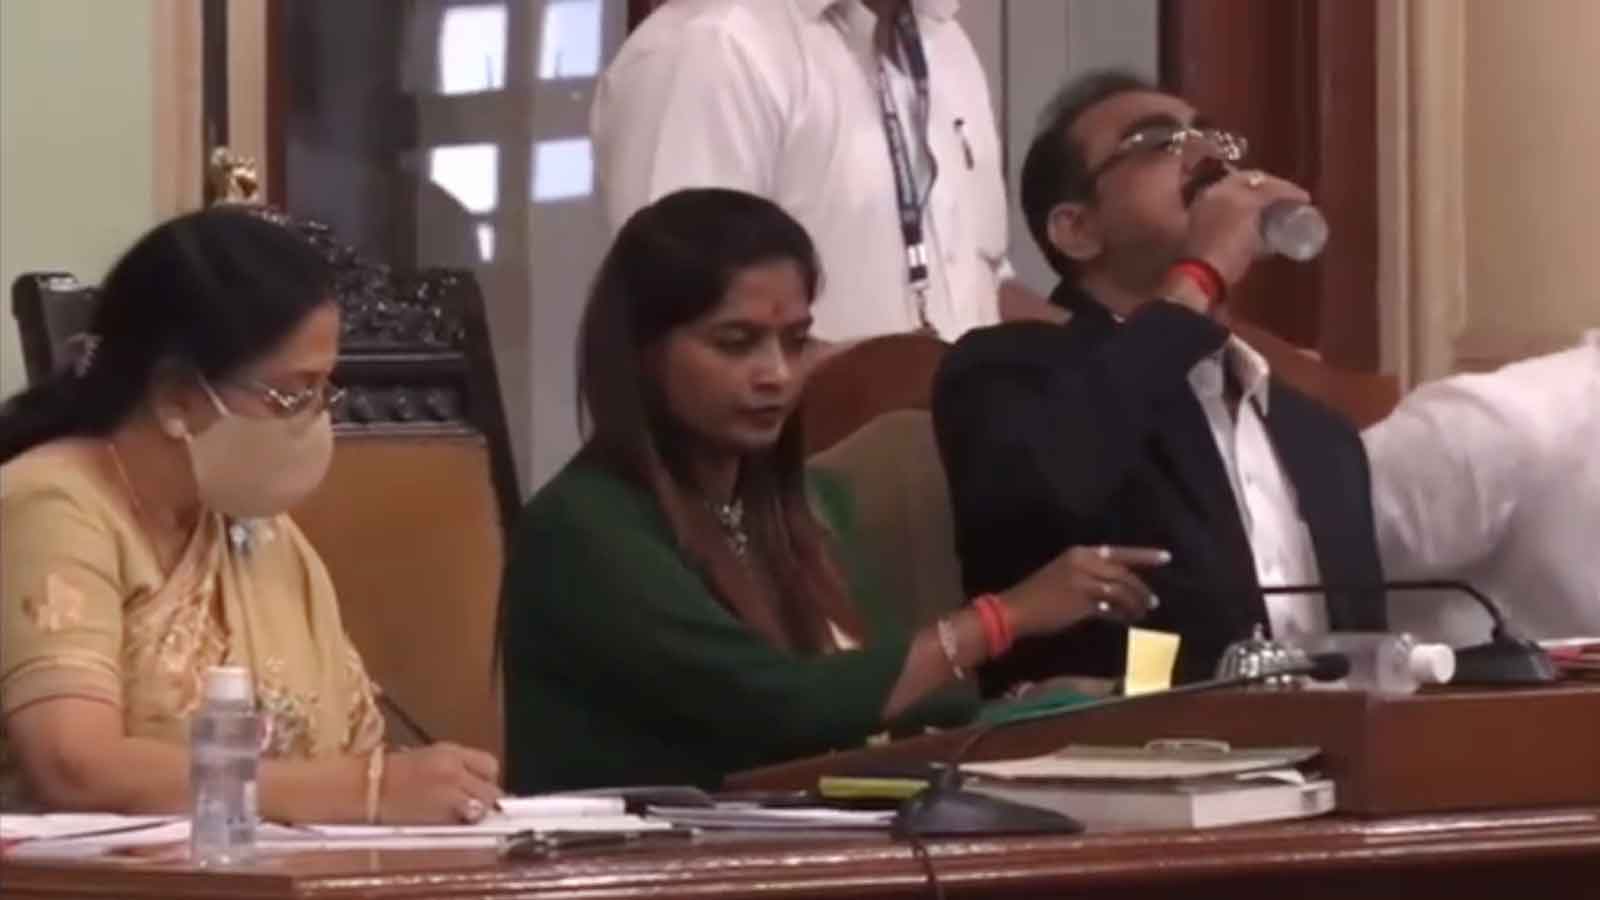 On cam: Official drinks sanitiser by mistake while presenting BMC's education budget